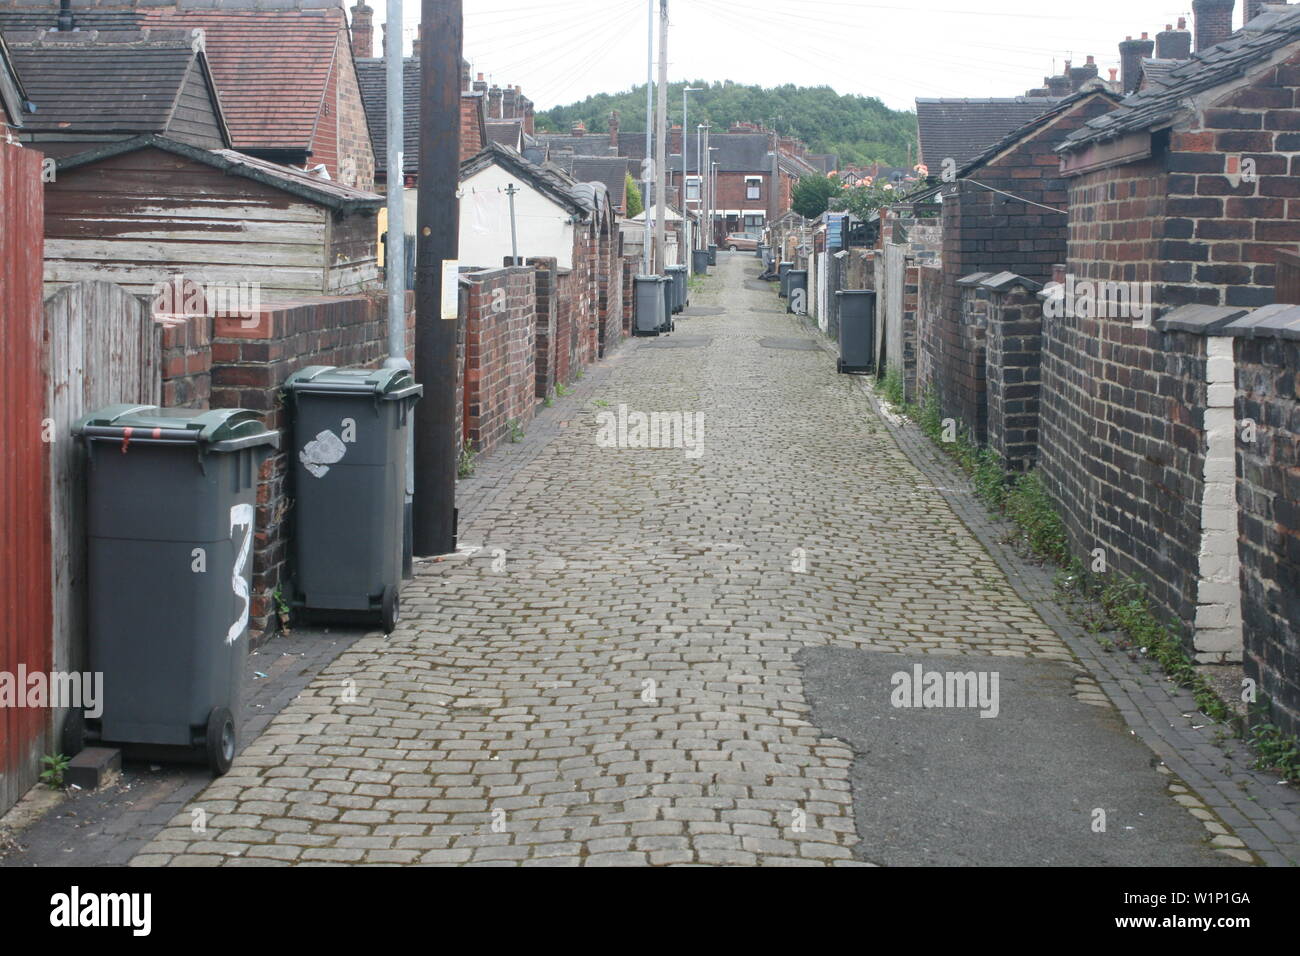 Back alley of terraced houses showing rubbish bins in Fenton, Stoke-on-Trent Stock Photo